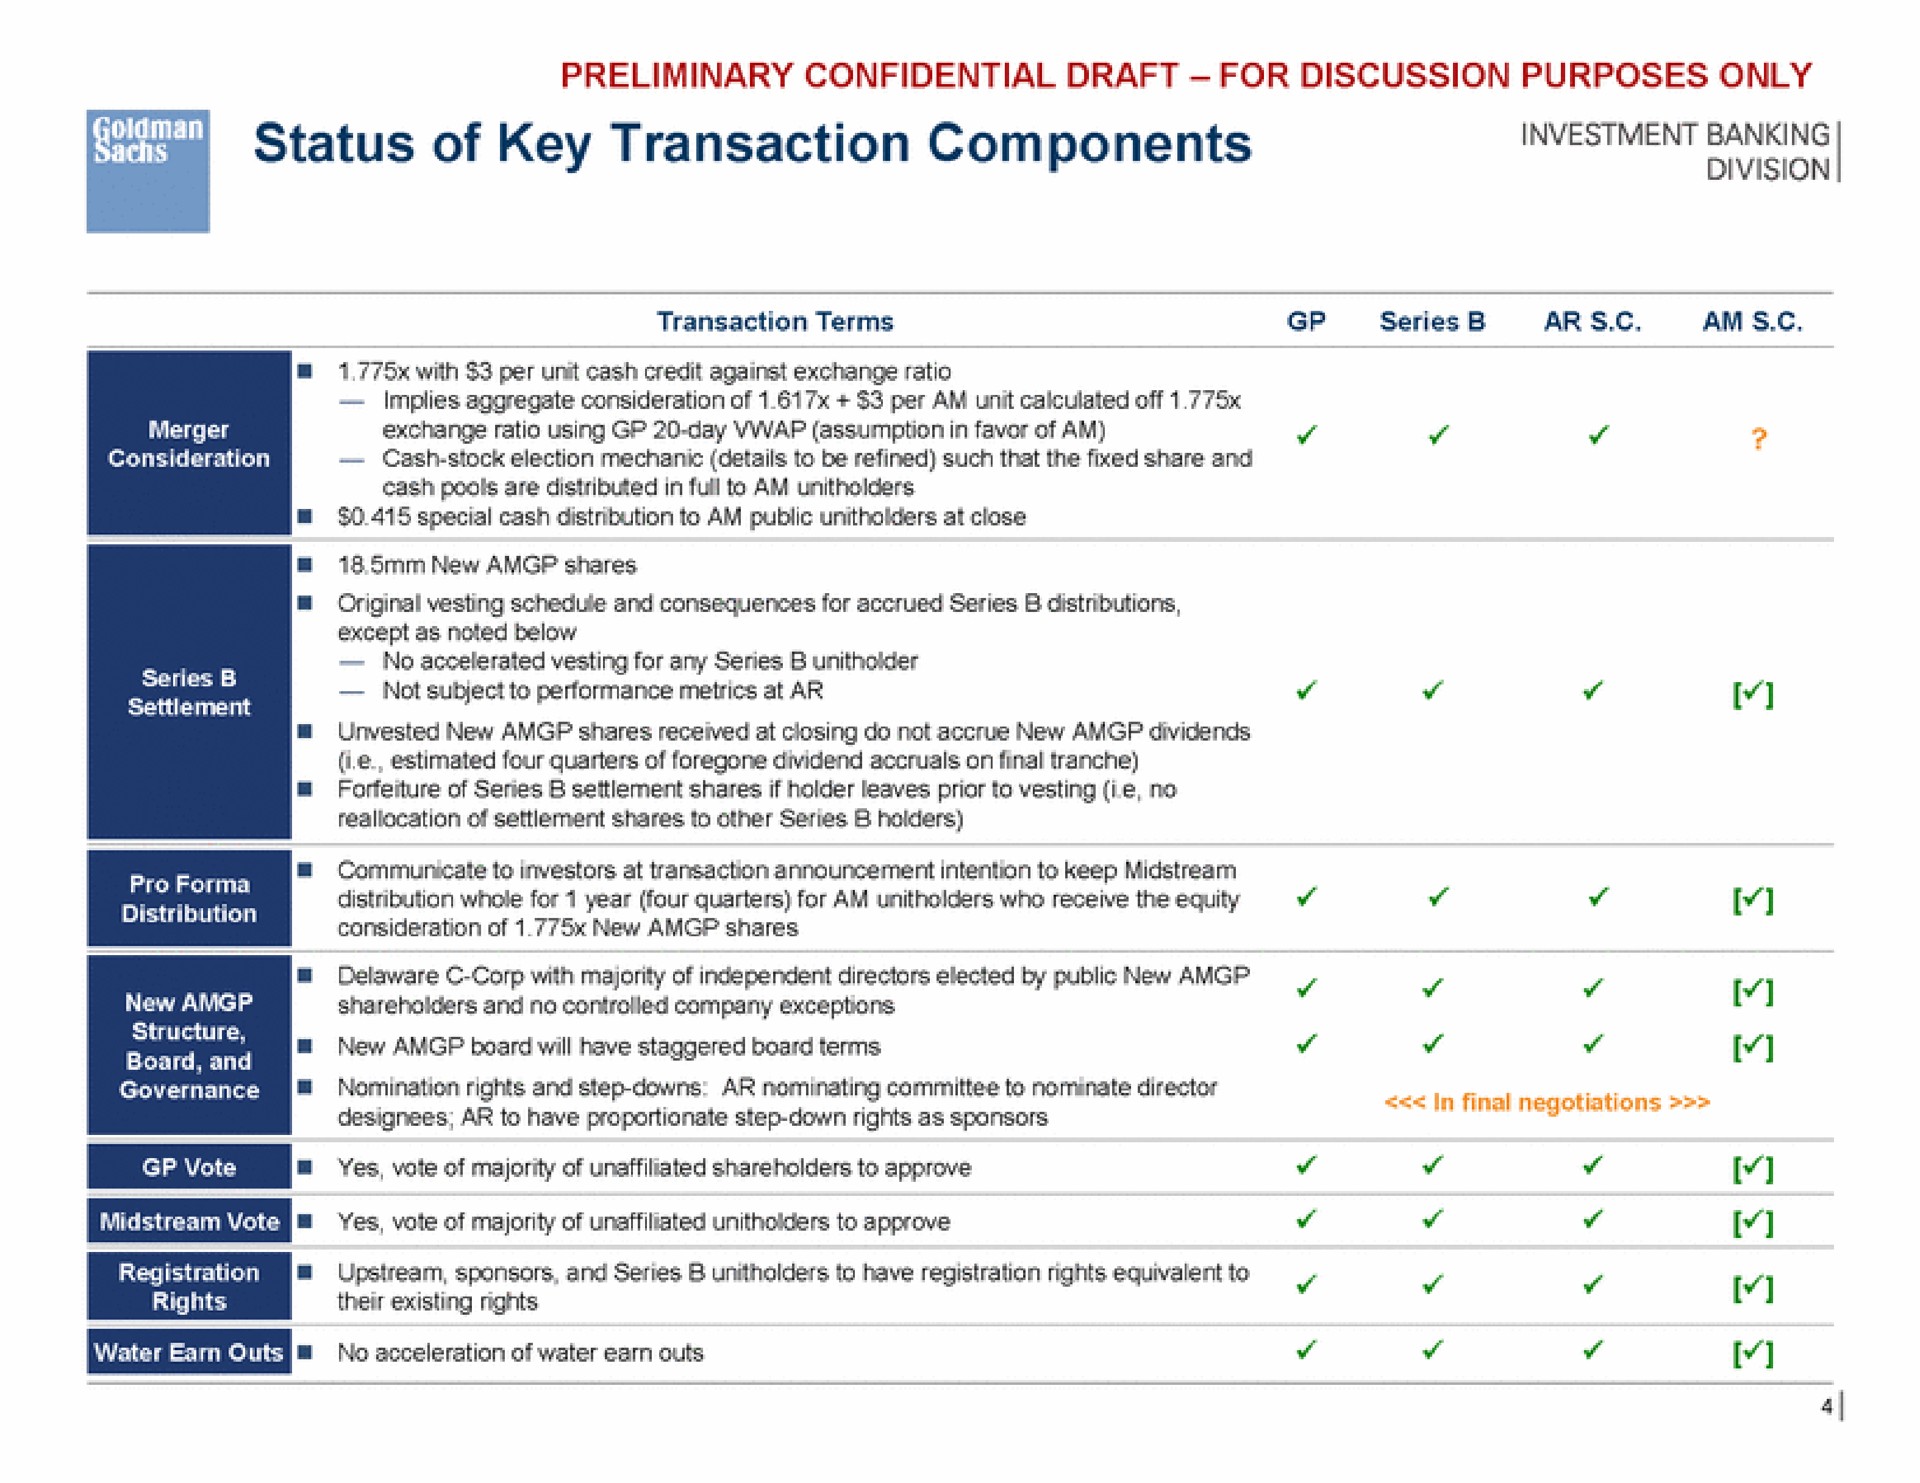 status of key transaction components investment banking yes vote of majority of unaffiliated shareholders to approve yes vote of majority of unaffiliated to approve a | Goldman Sachs